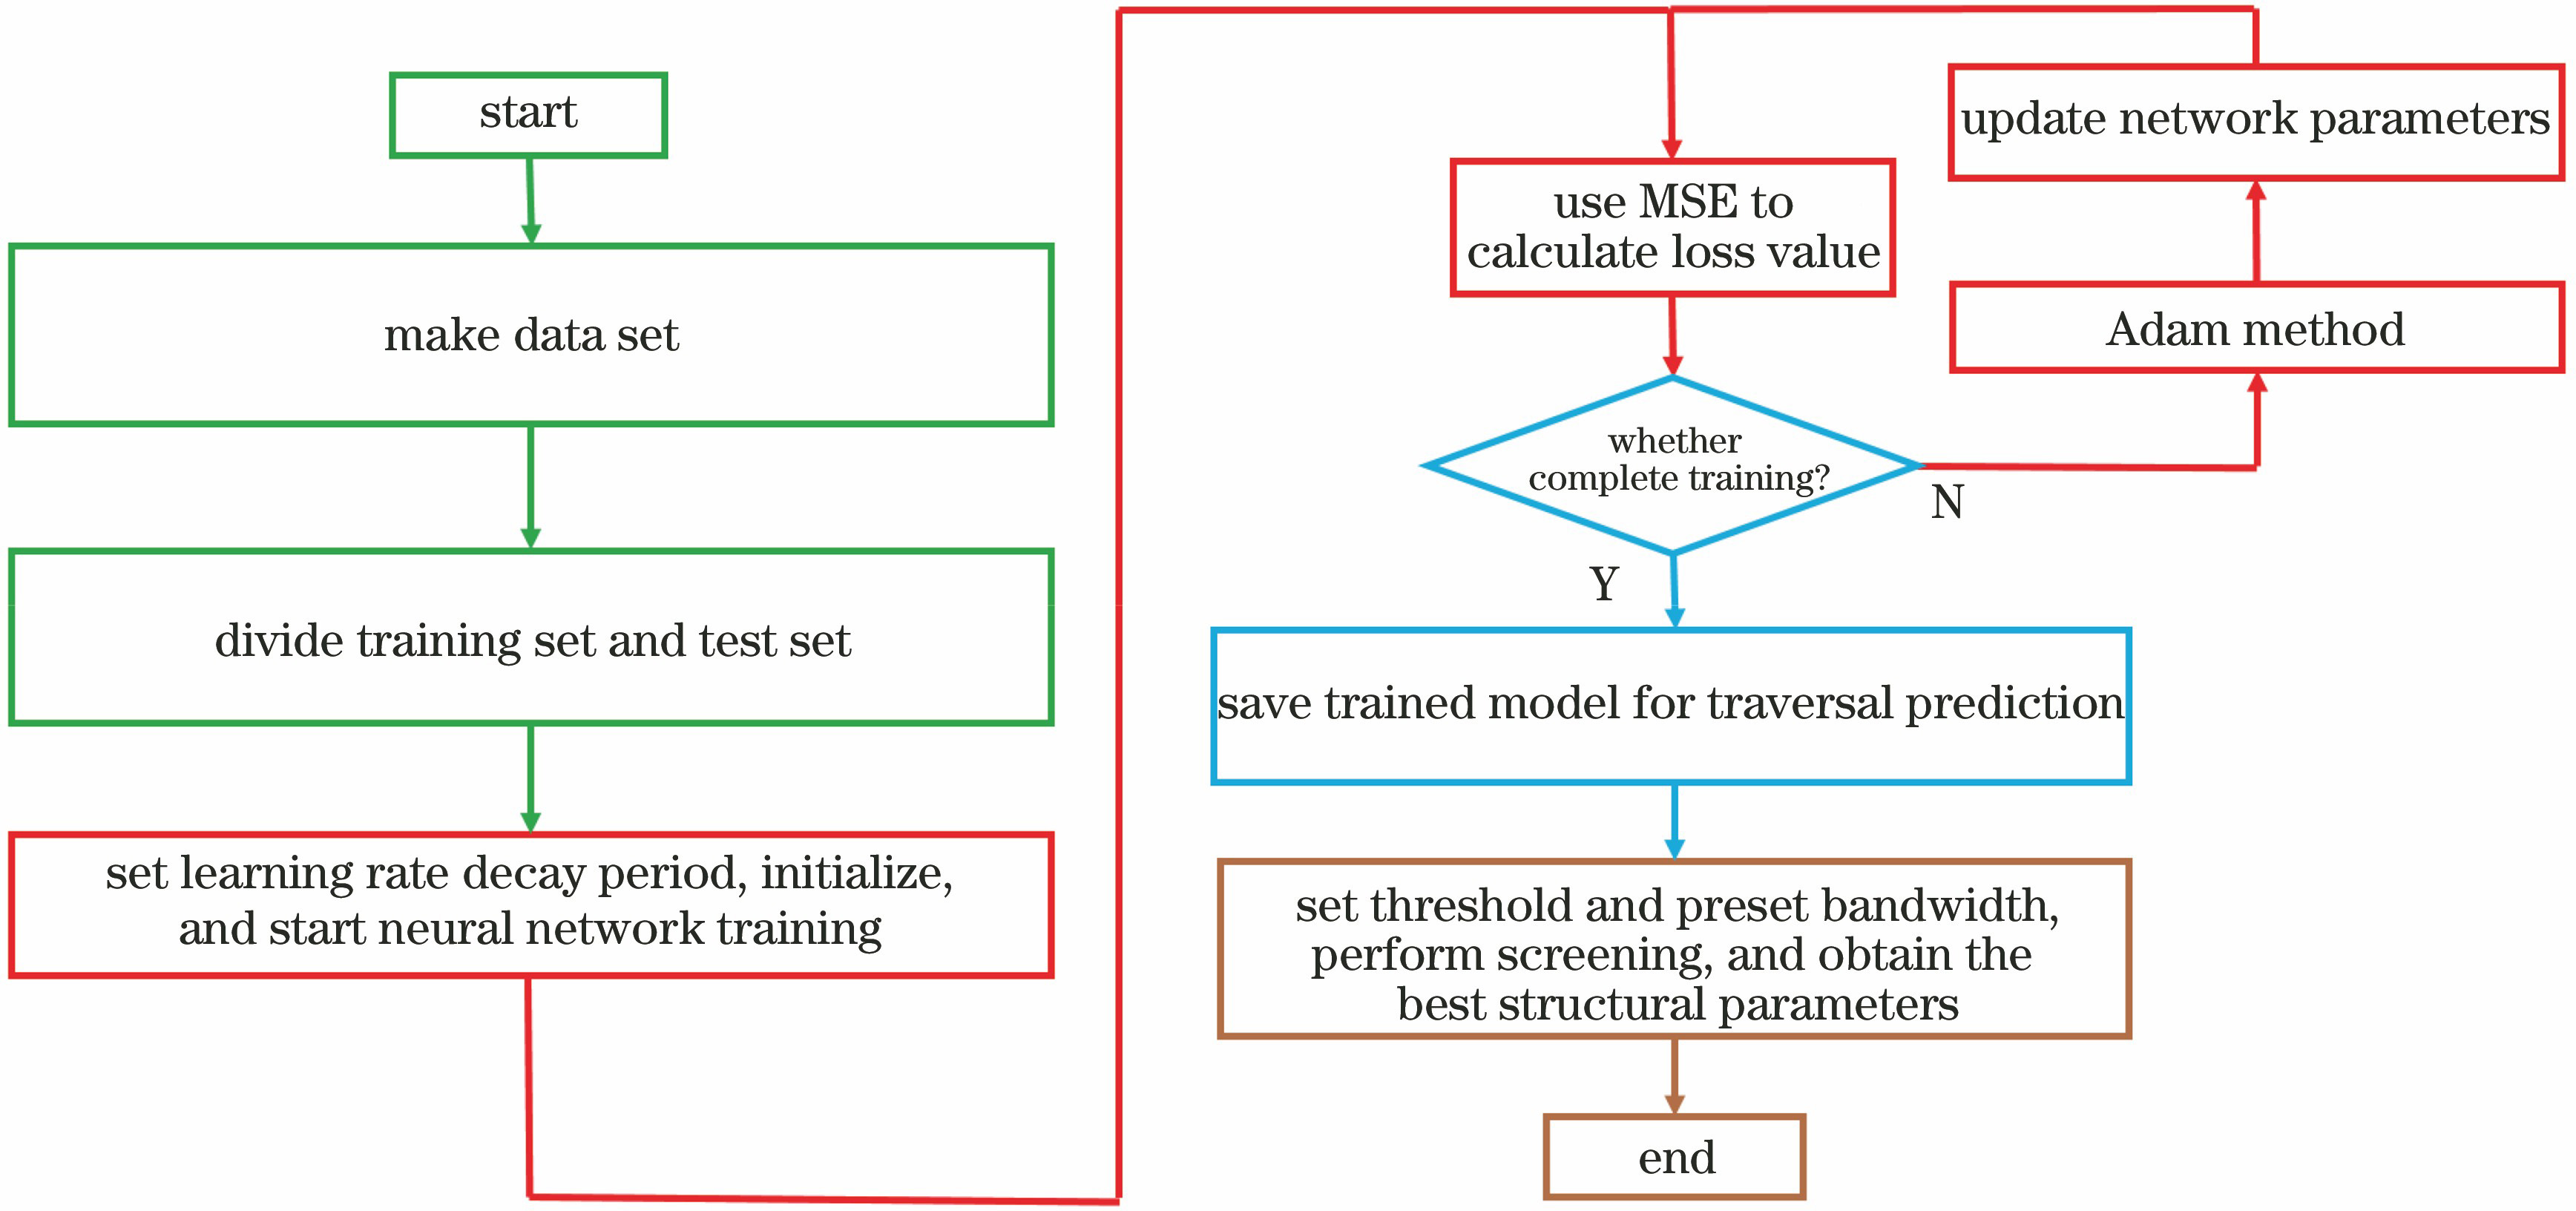 Flow chart of grating optimization based on deep learning neural network